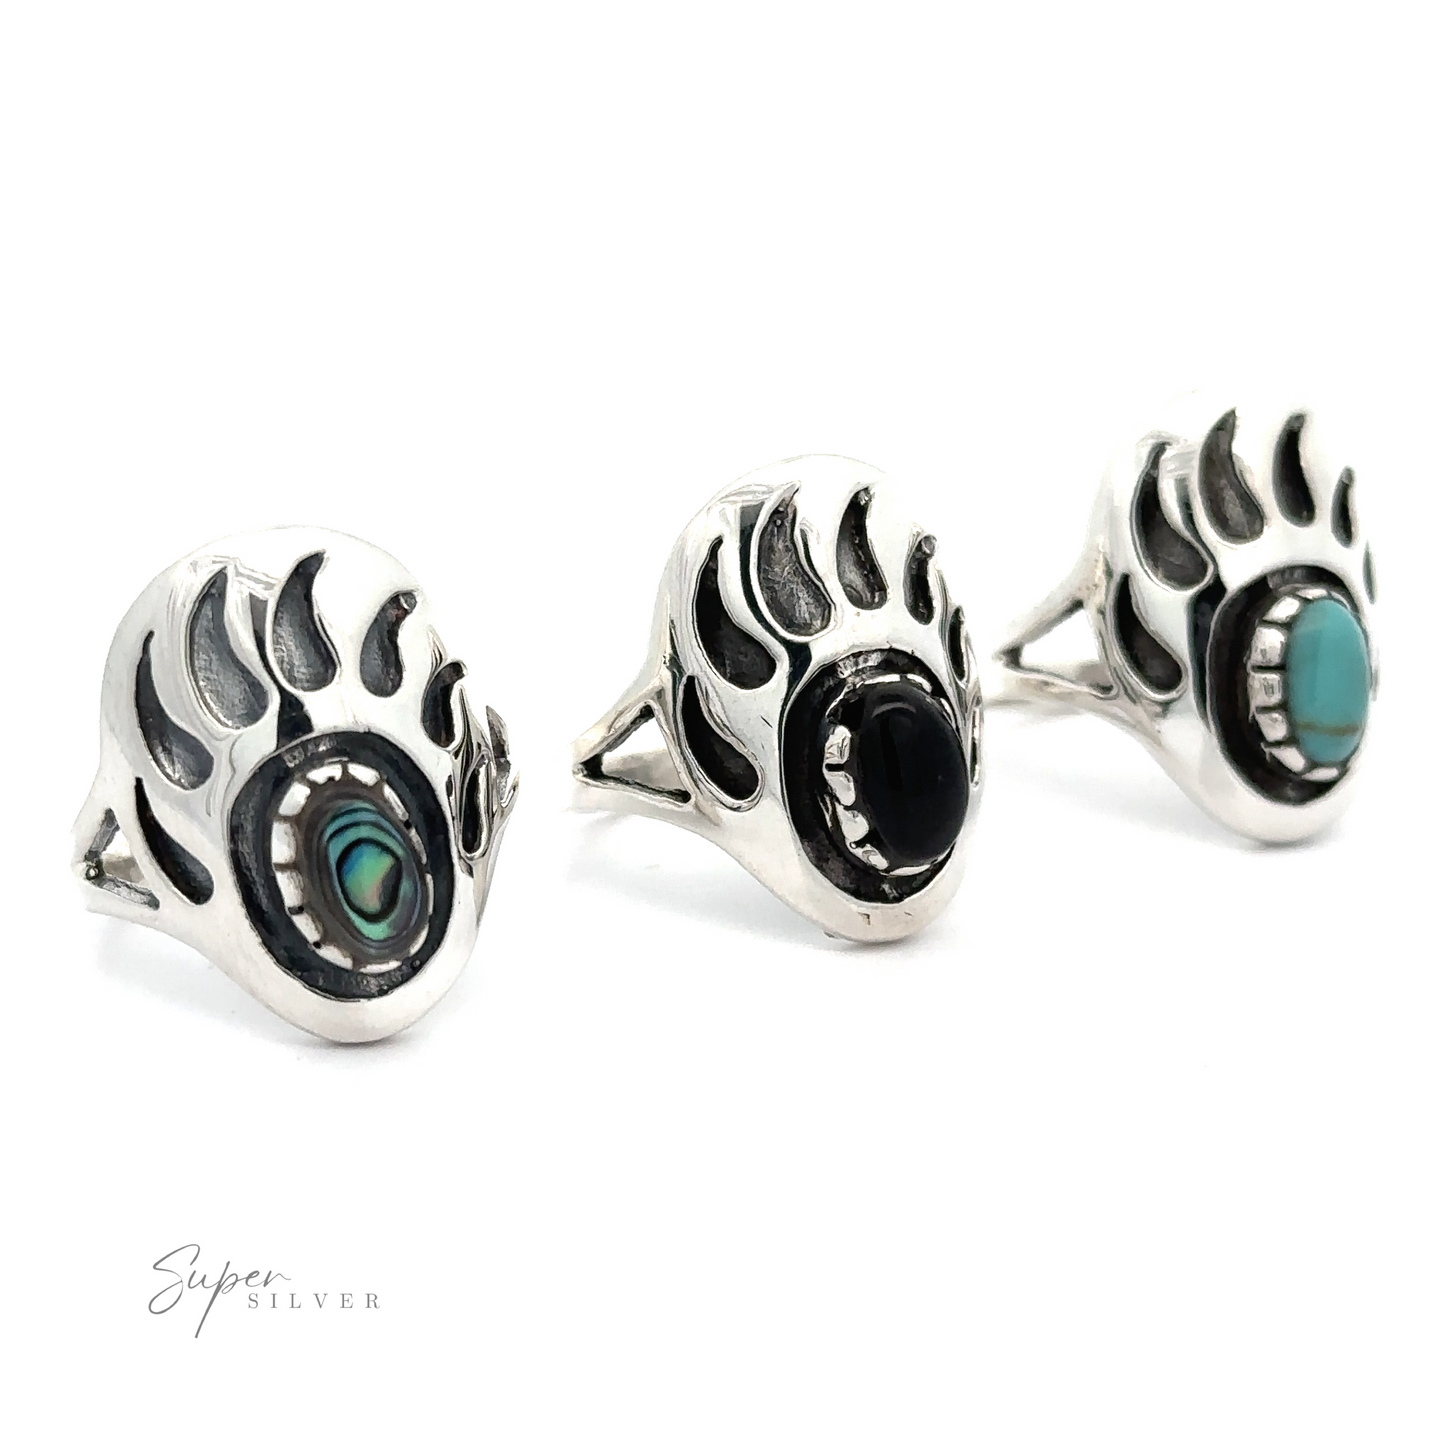 Three silver rings with turquoise stones, including one Stone Bear Paw ring.